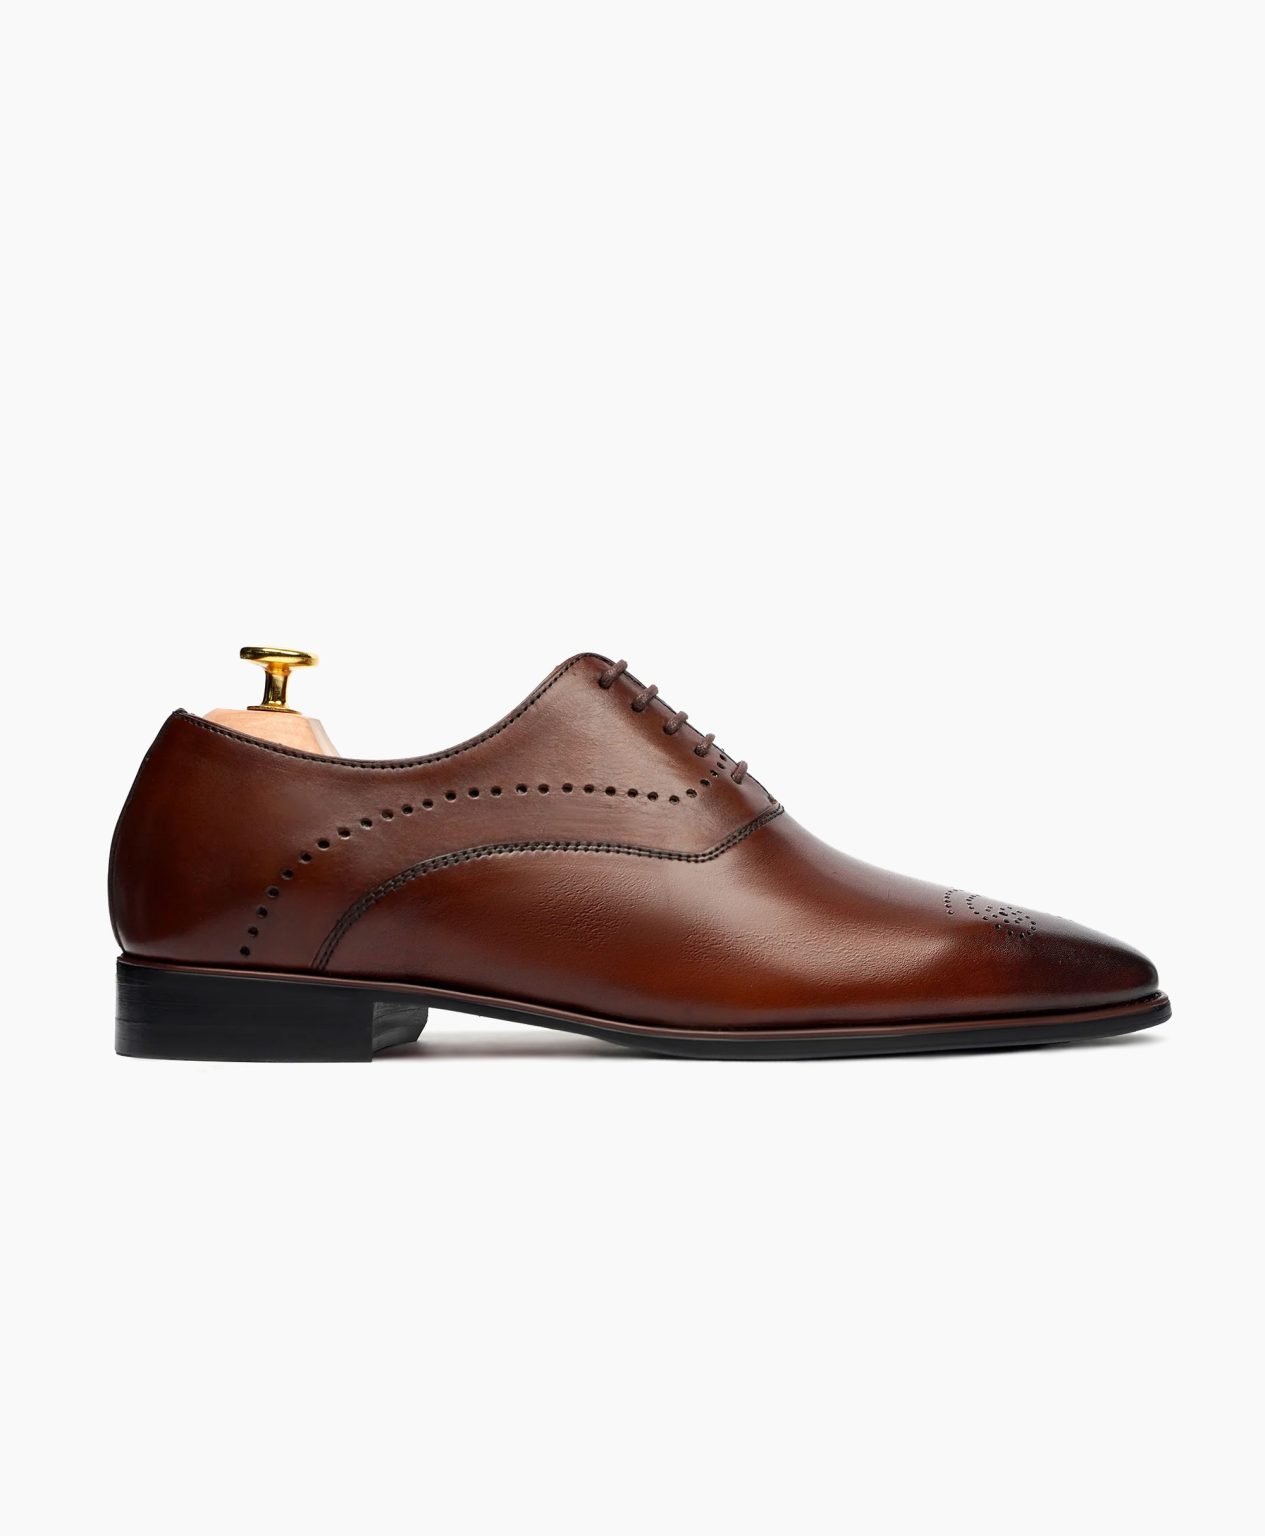 macclesfield-oxford-reddish-brown-leather-shoes-image201